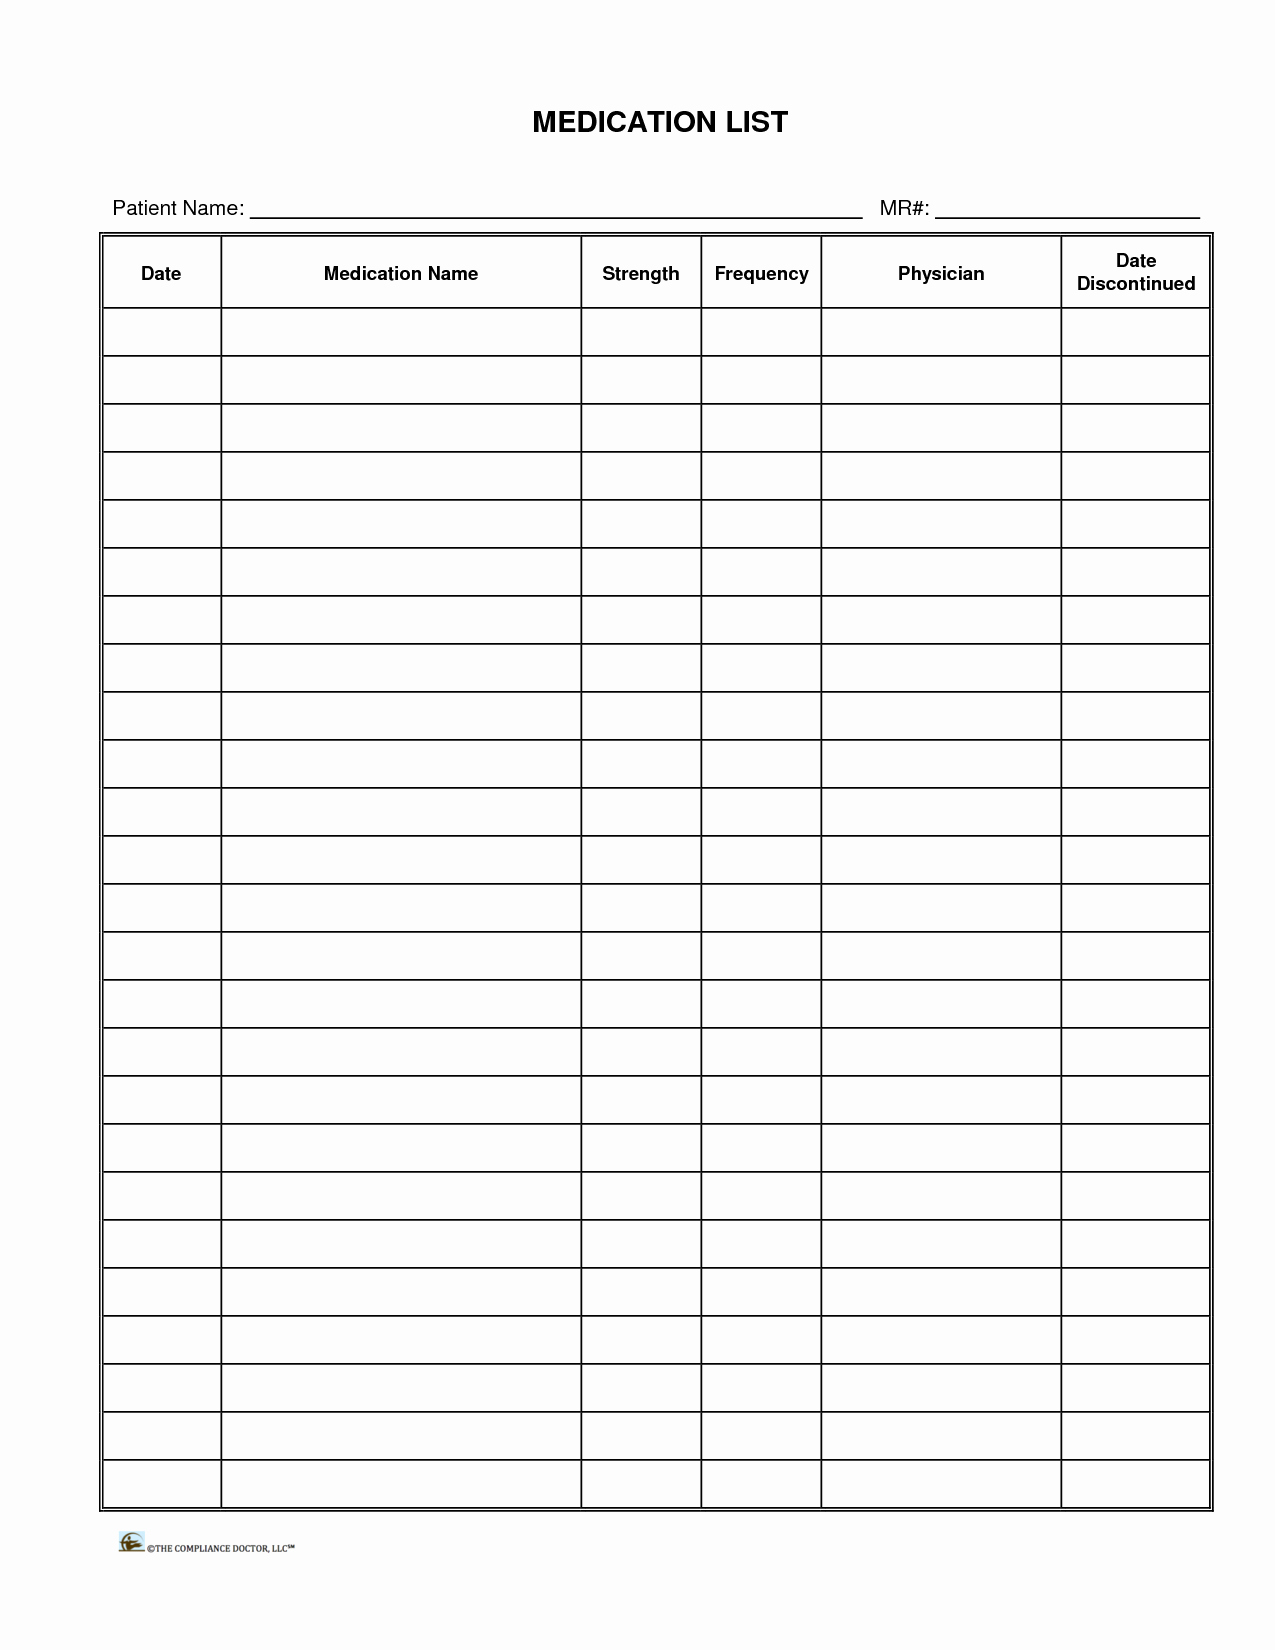 Medication Chart Template Free Download New Patient Medication List Template